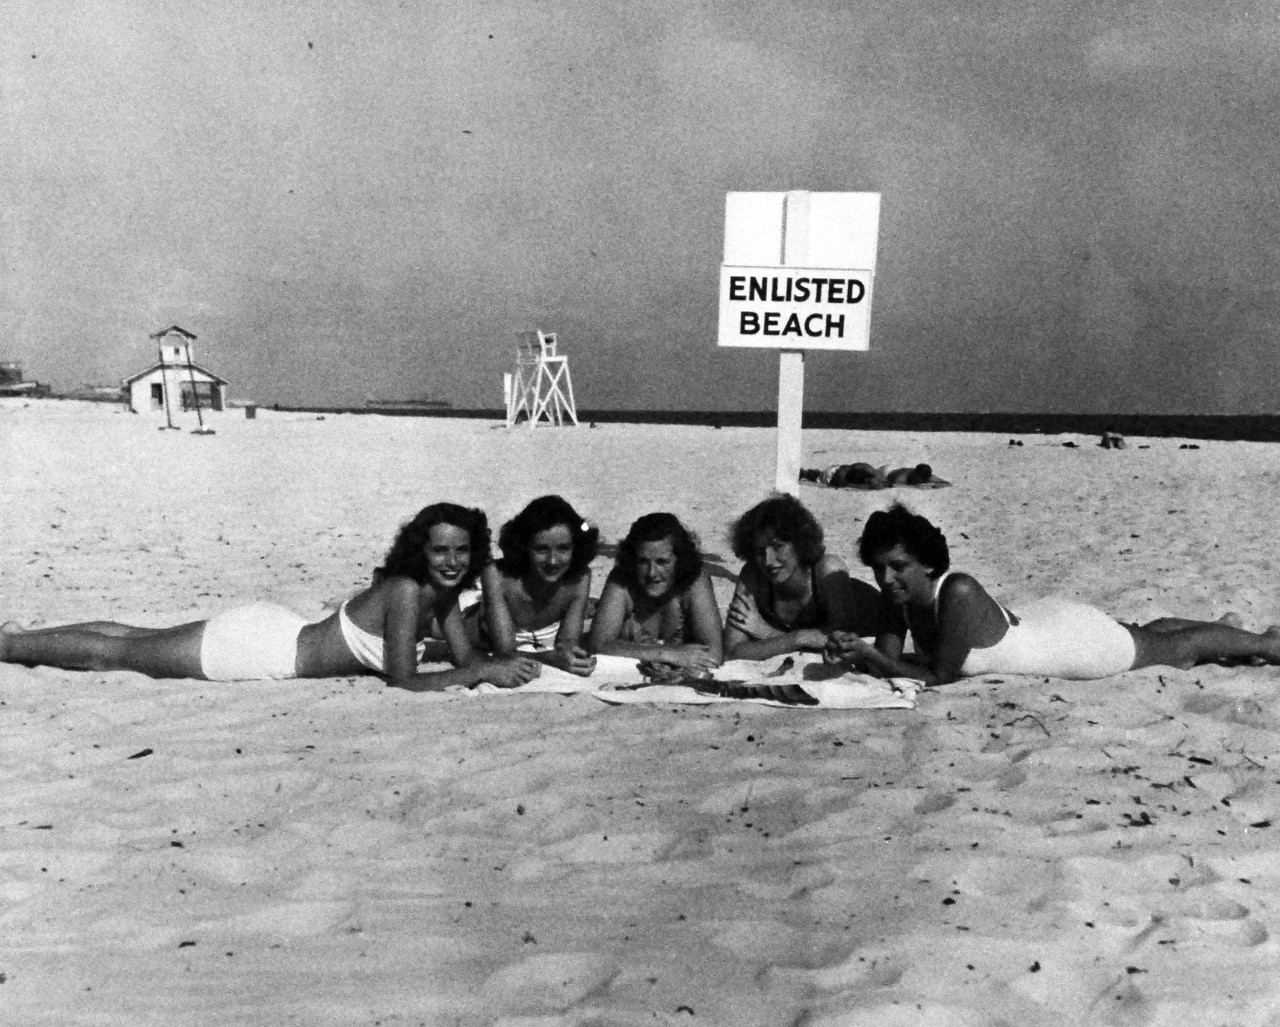 80-G-420872:   Activities of WAVE Reservists at Pensacola, Florida, October 1950.    WAVEs sunbathing on the beach, October 1950.  Photograph received 20 October 1950.   Official U.S. Navy photograph, now in the collections of the National Archives. 